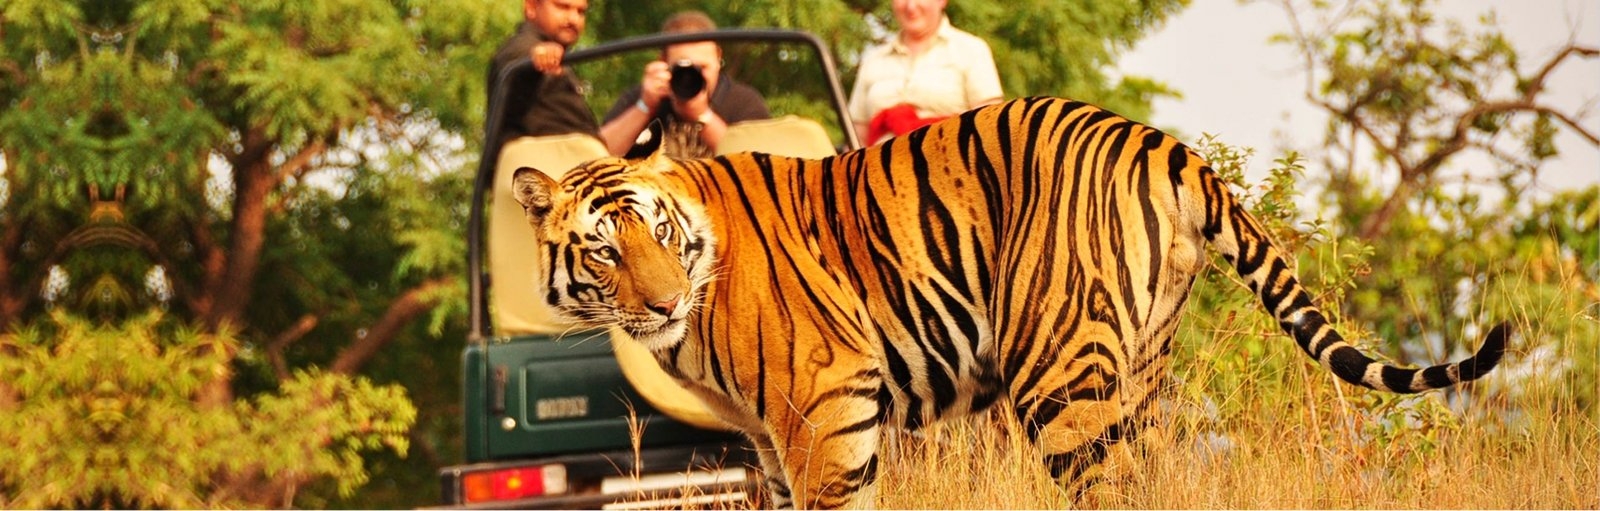 Luxury India Travel with Tiger